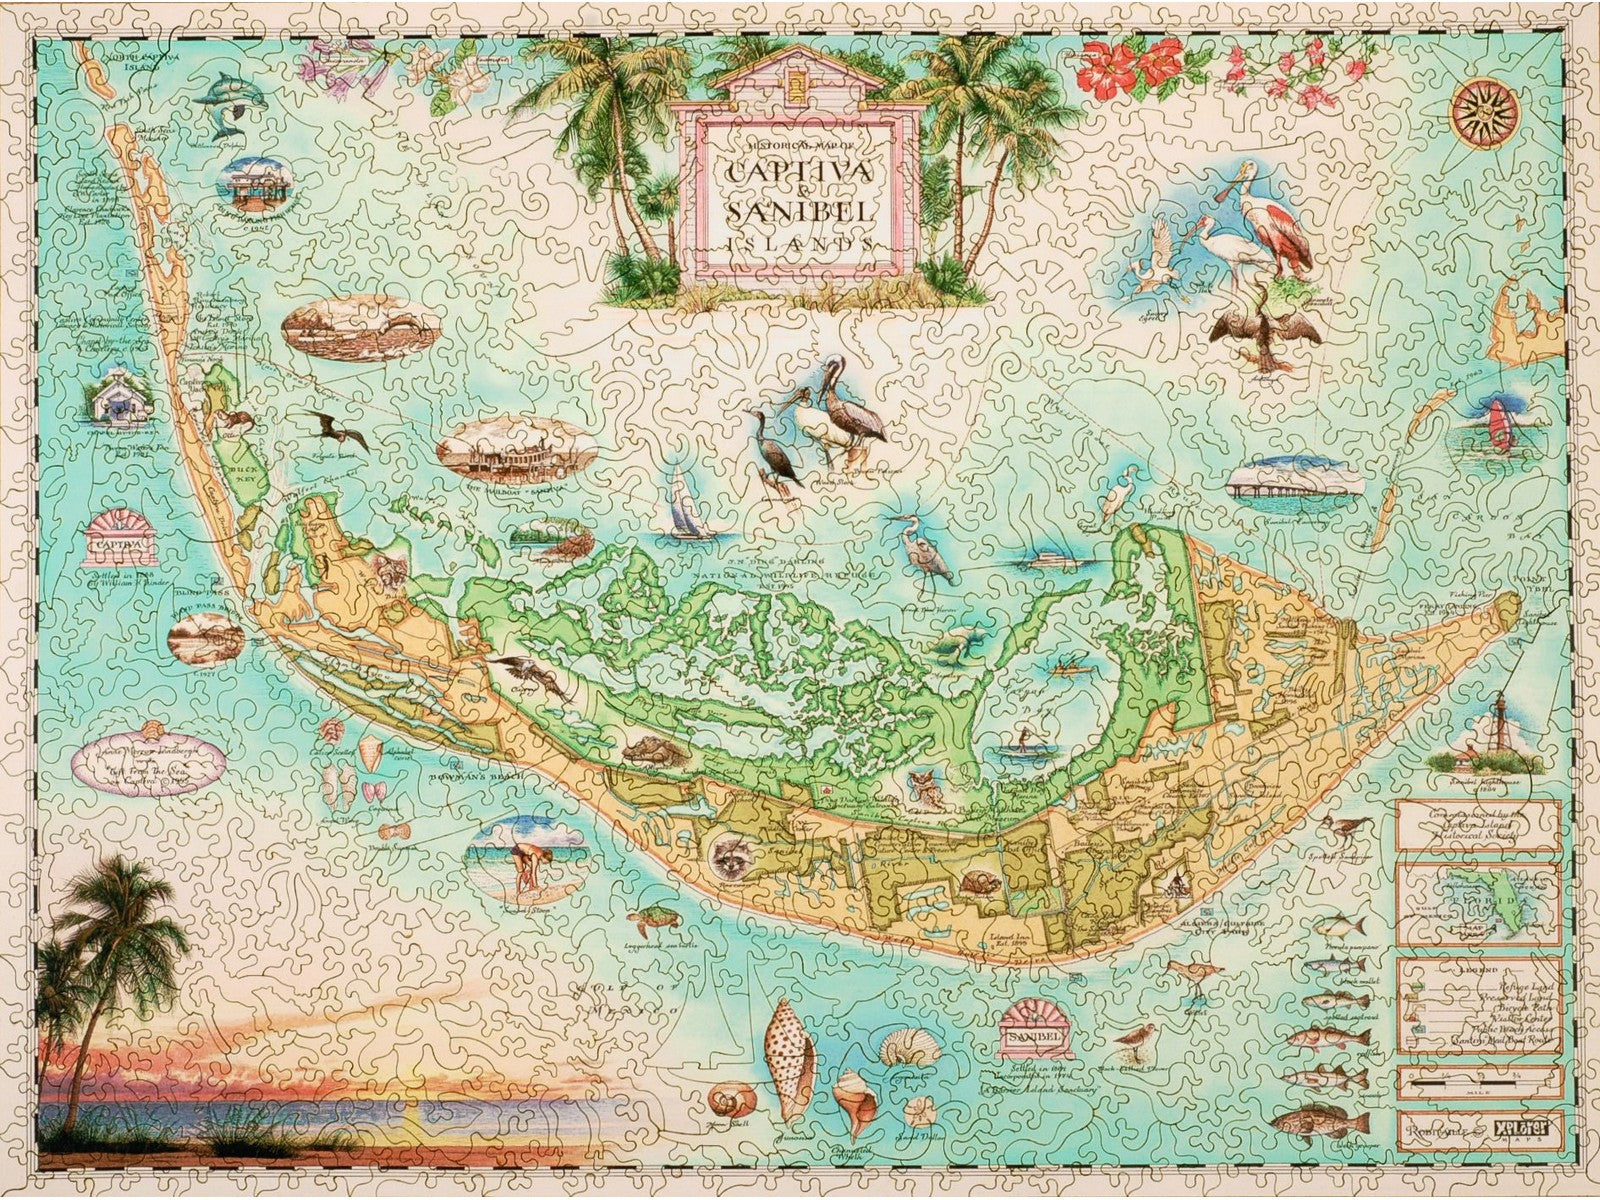 The front of the puzzle, Captiva and Sanibel Islands, showing a map of the islands, surrounded by drawings of seashells and local wildlife.